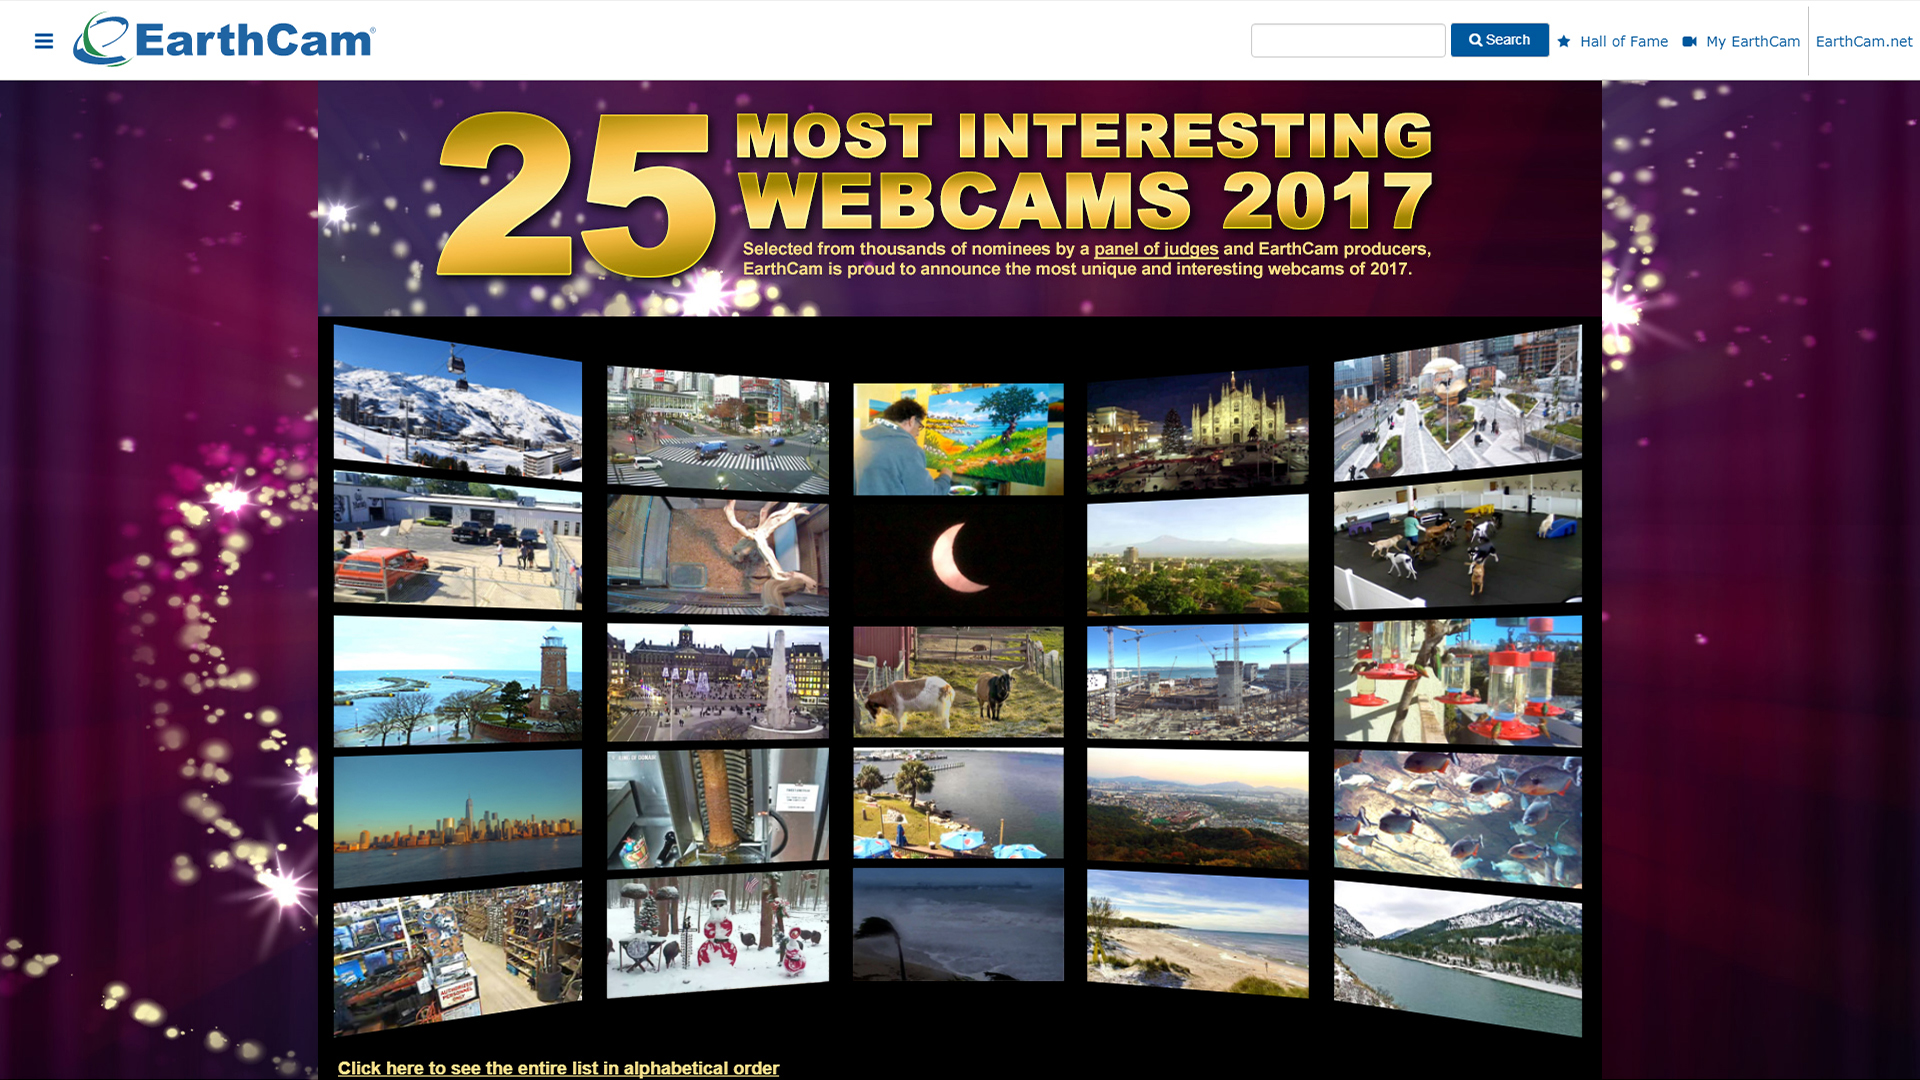 EarthCam's 25 Most Interesting Webcams of 2017